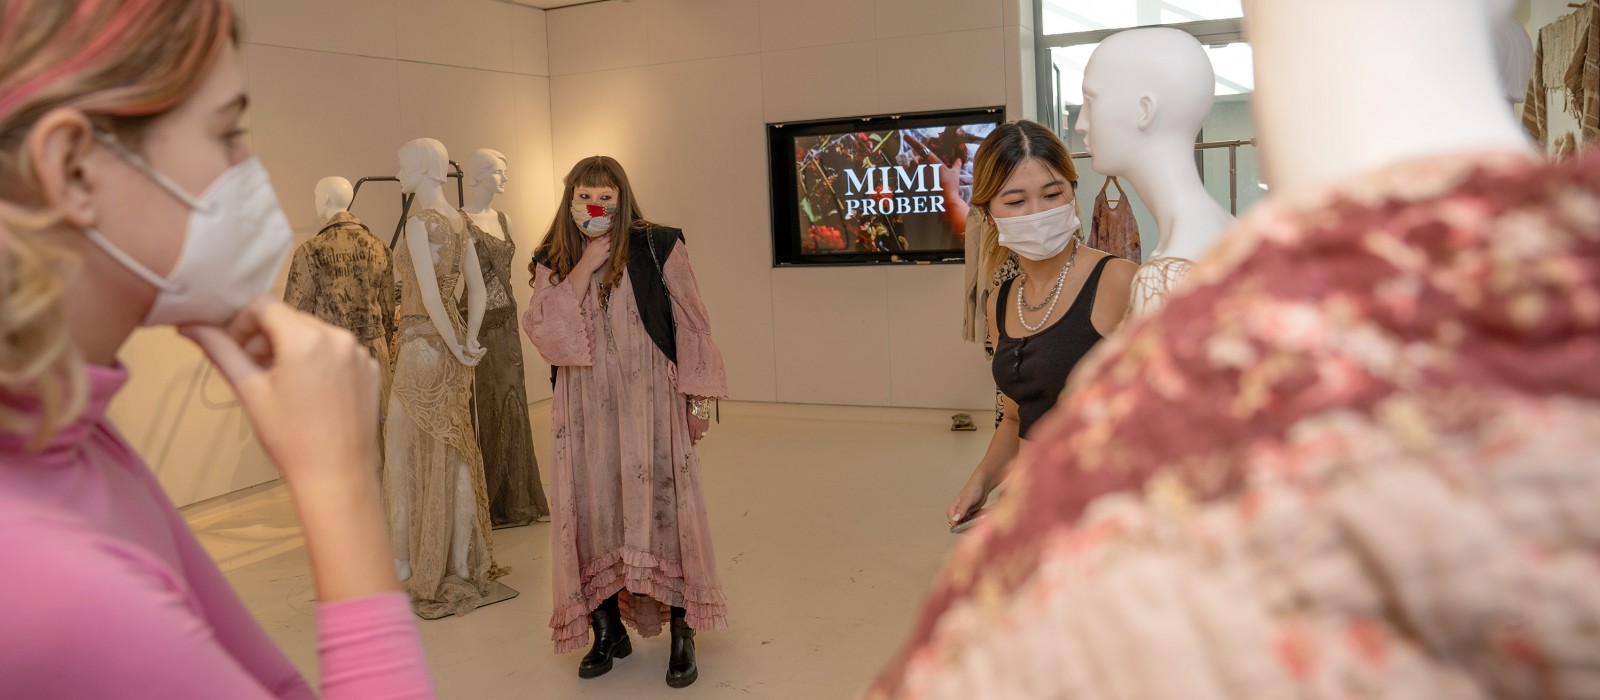 Mimi Prober with fashion design students looking at clothing